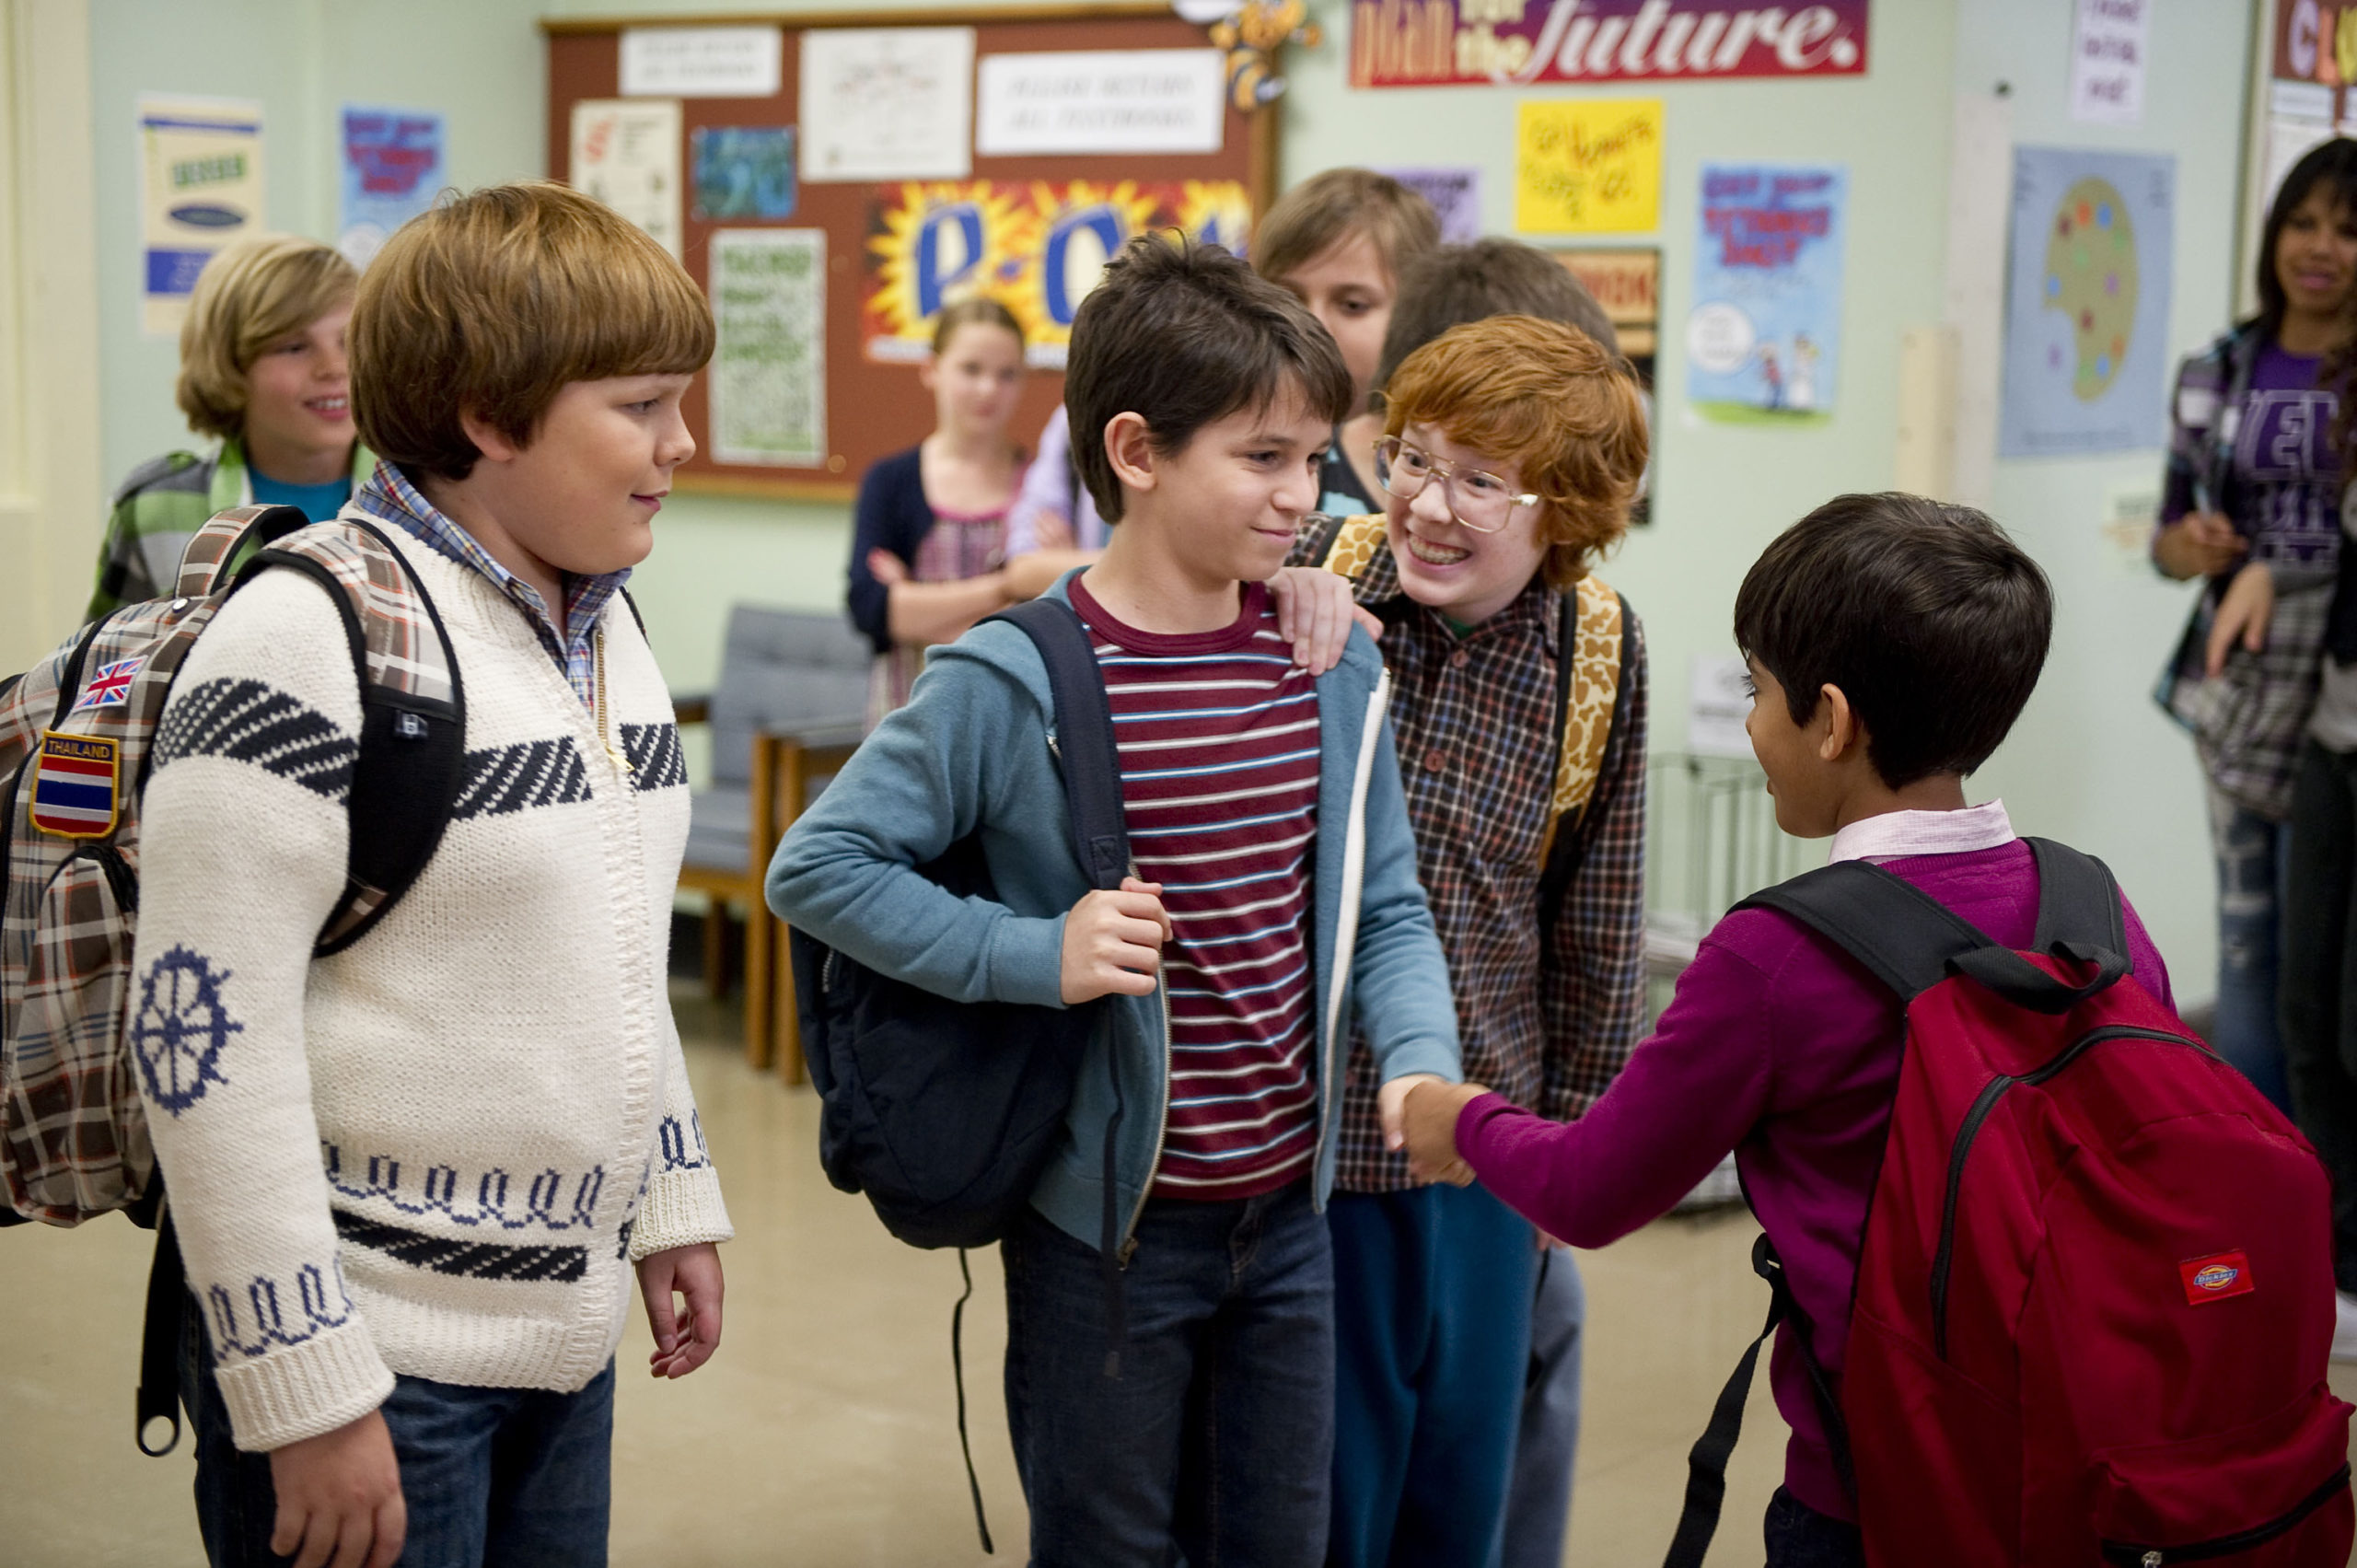 Wimpy Kid': A Hilarious Take On Middle School Life